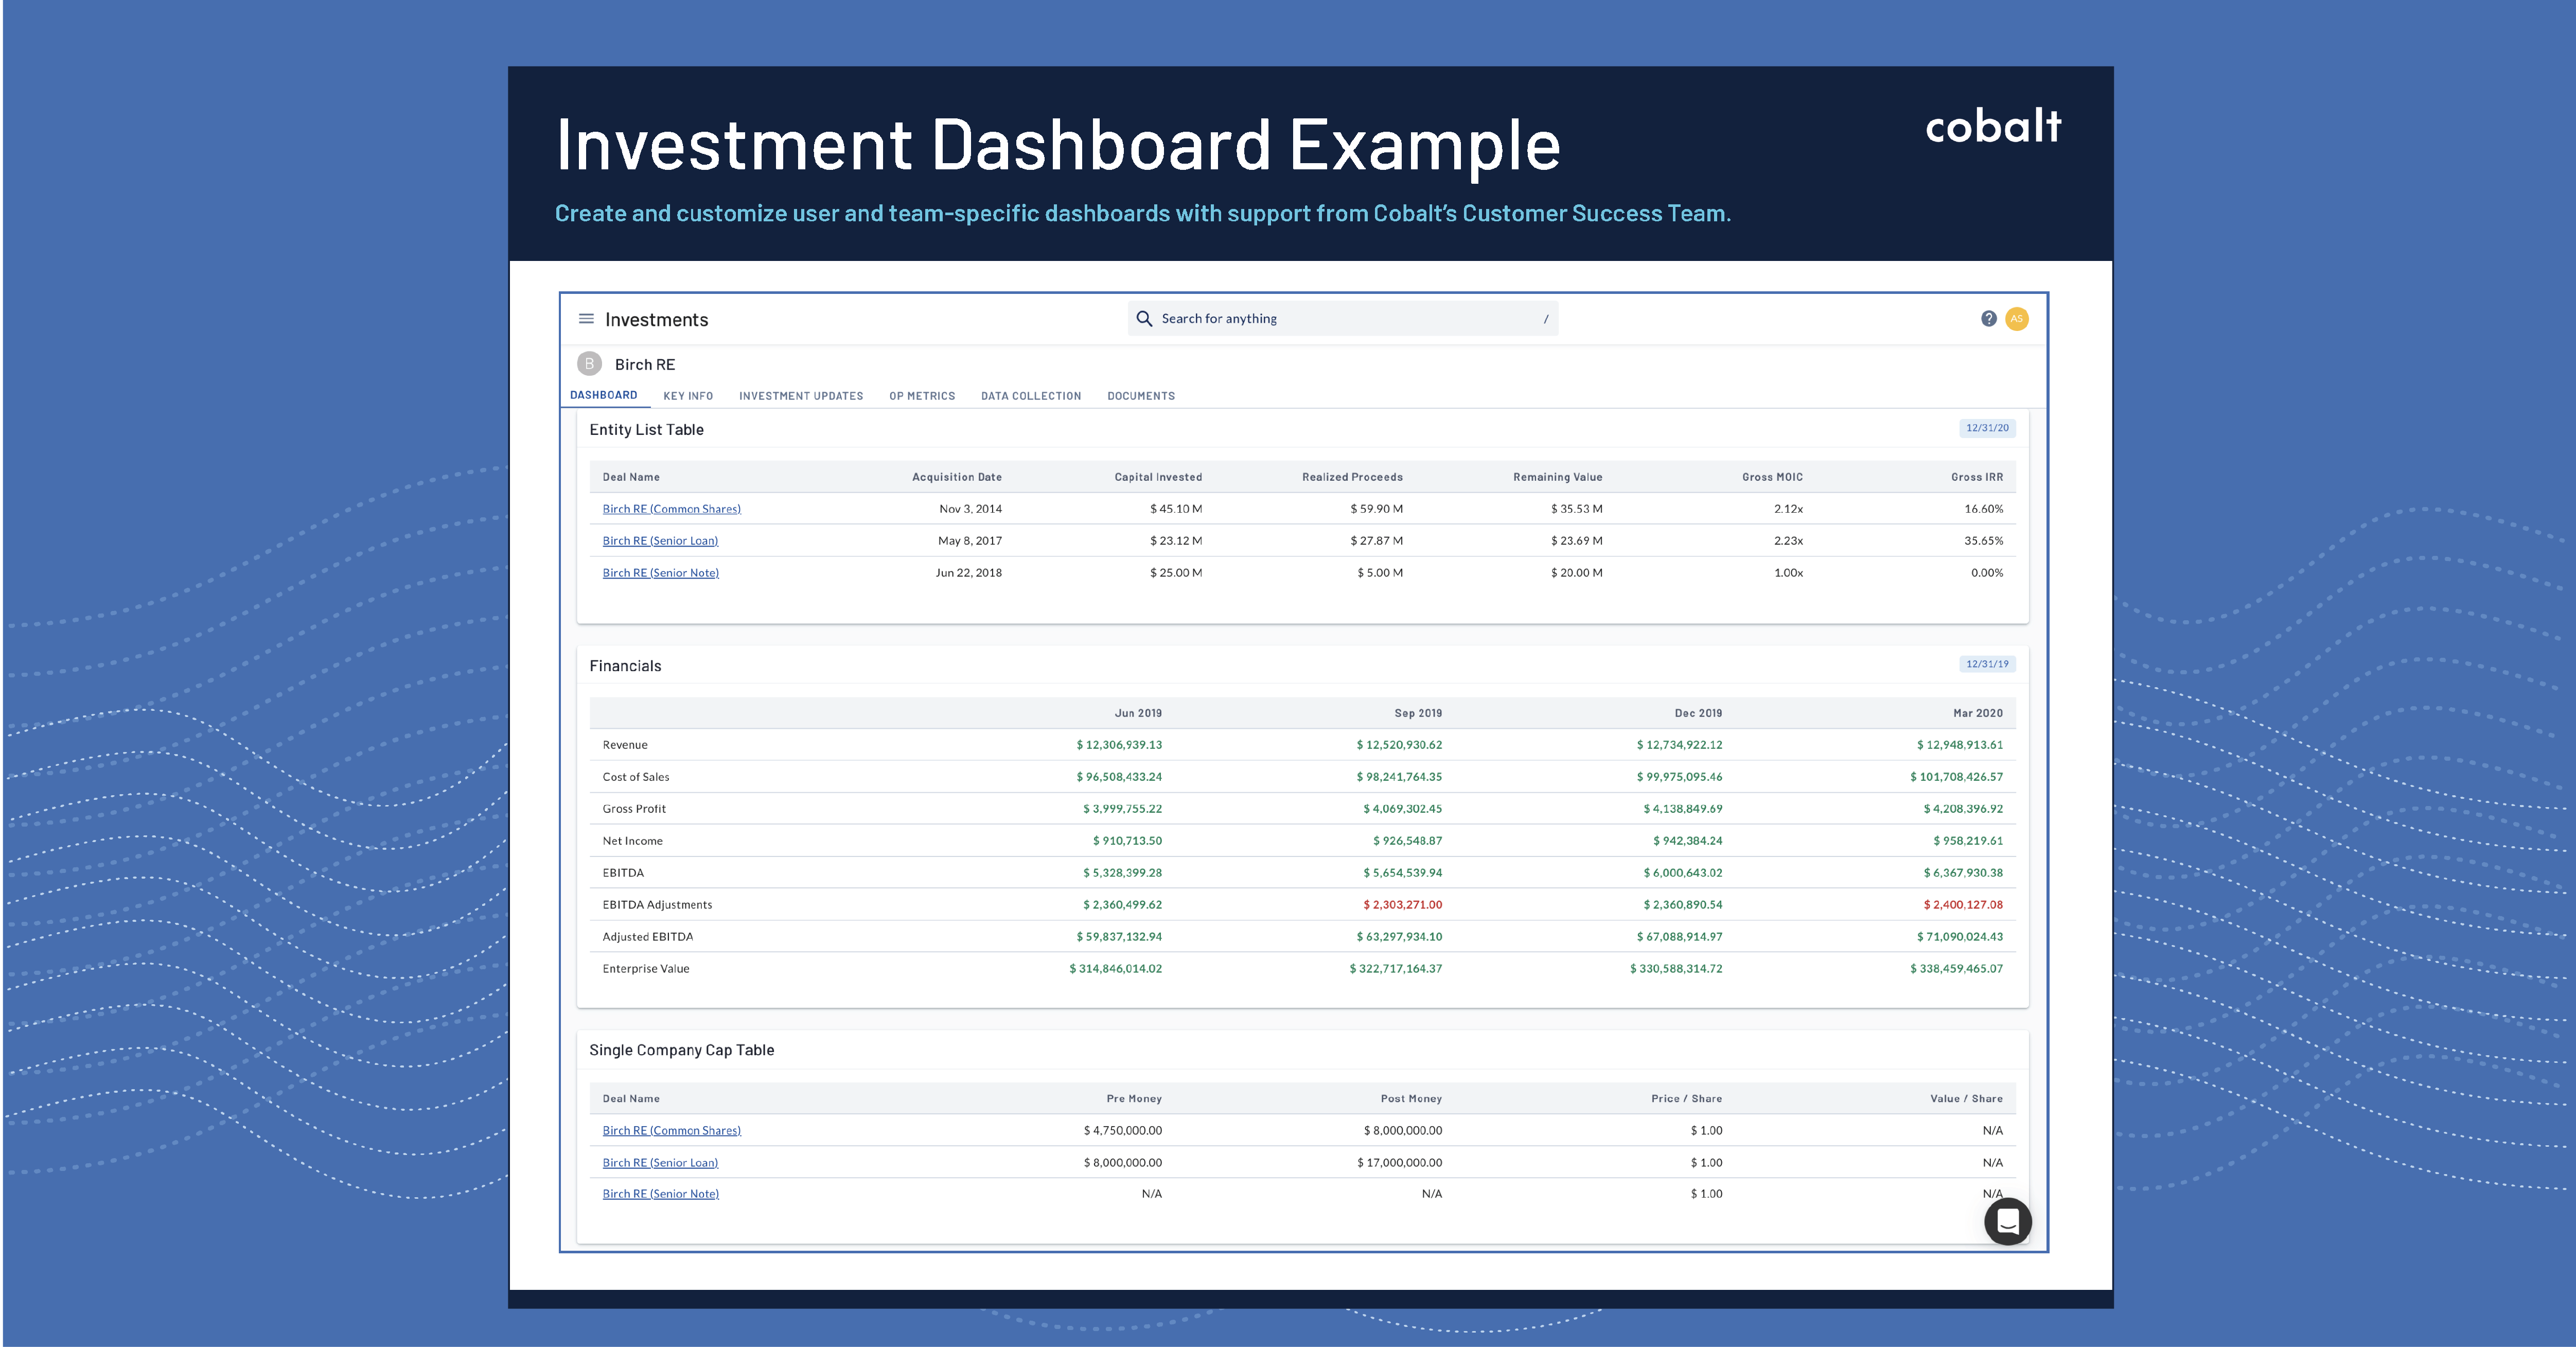 Personalized Dashboards: The Finance Team Cobalt a FactSet Company